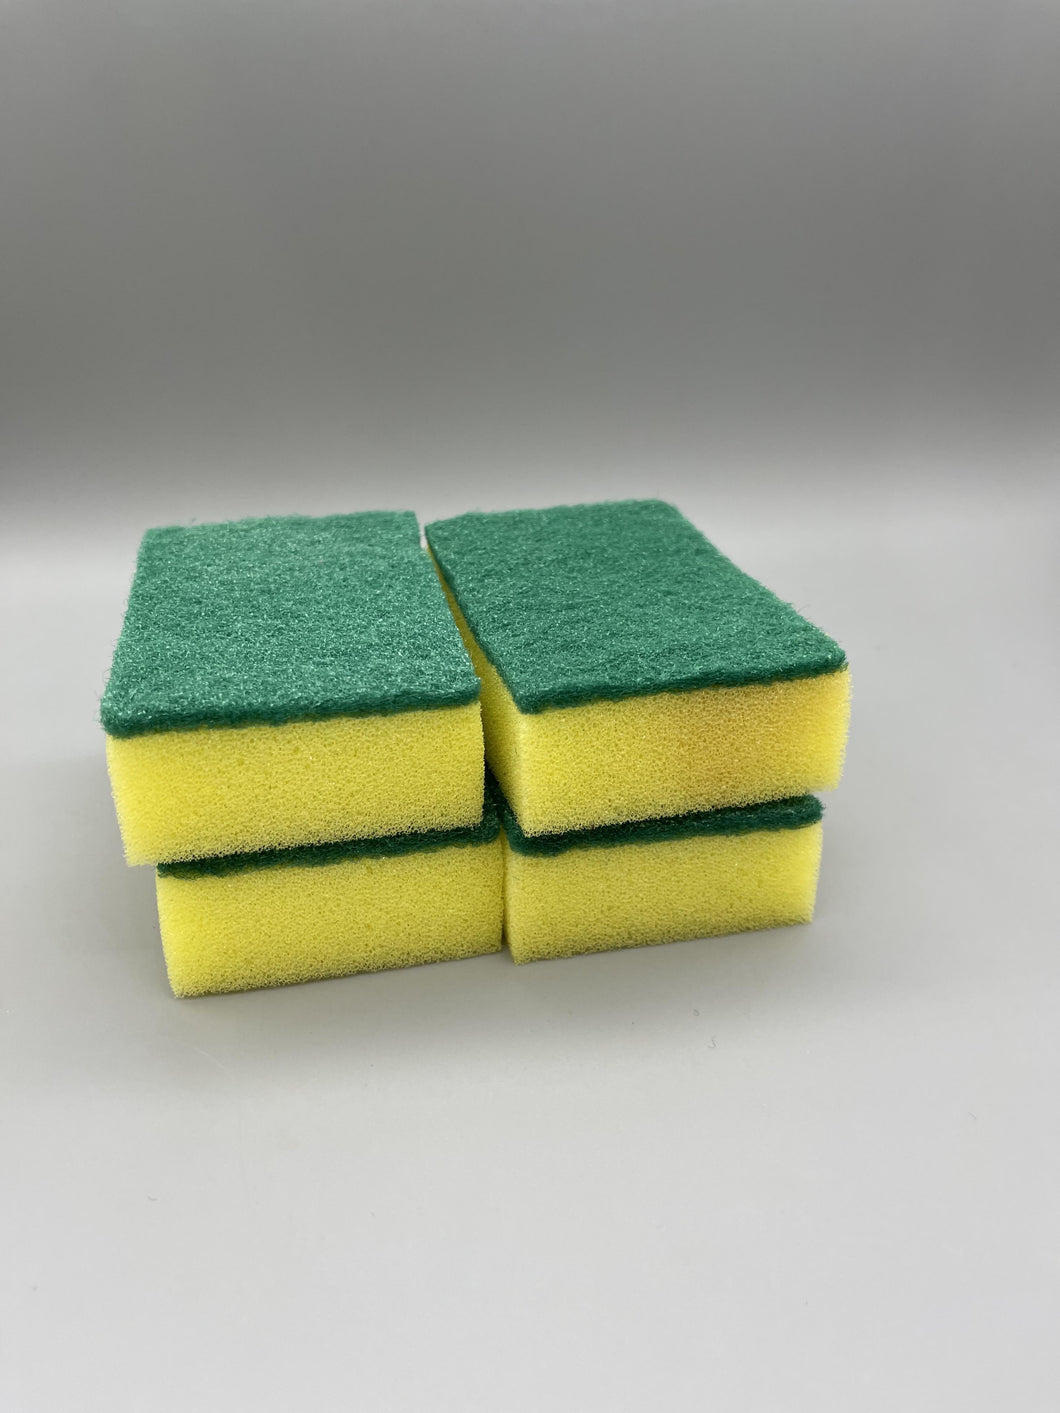 XNEWUYG Cleaning sponges,Dishwashing Sponge Along with A Thought Scouring Pad -Ideal for Cleaning Kitchen ,Dishes, Bathroom- Yellow- 4 Dish sponges,Made from Tough Cellulose